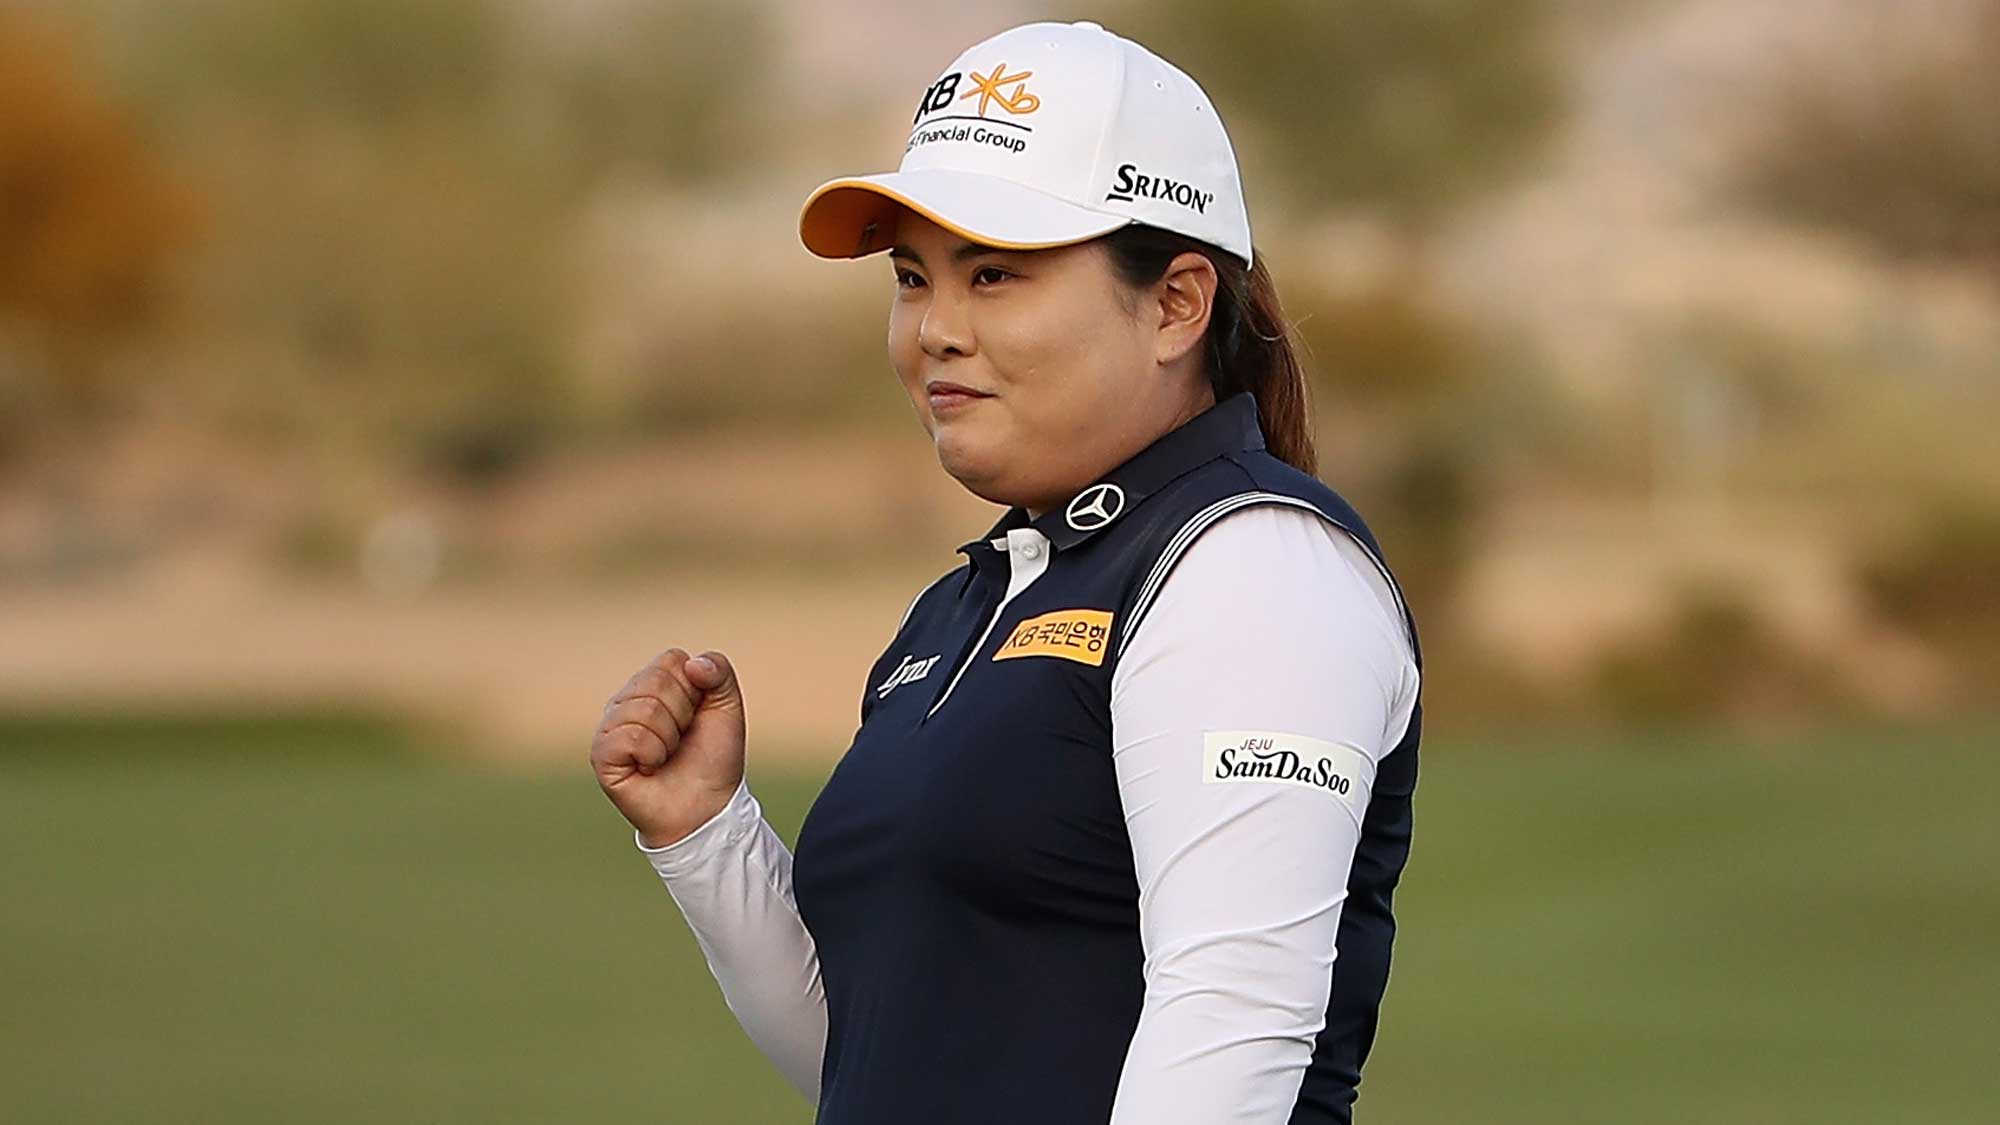 Inbee Park Fist Pump After Sealing Founders Cup Title